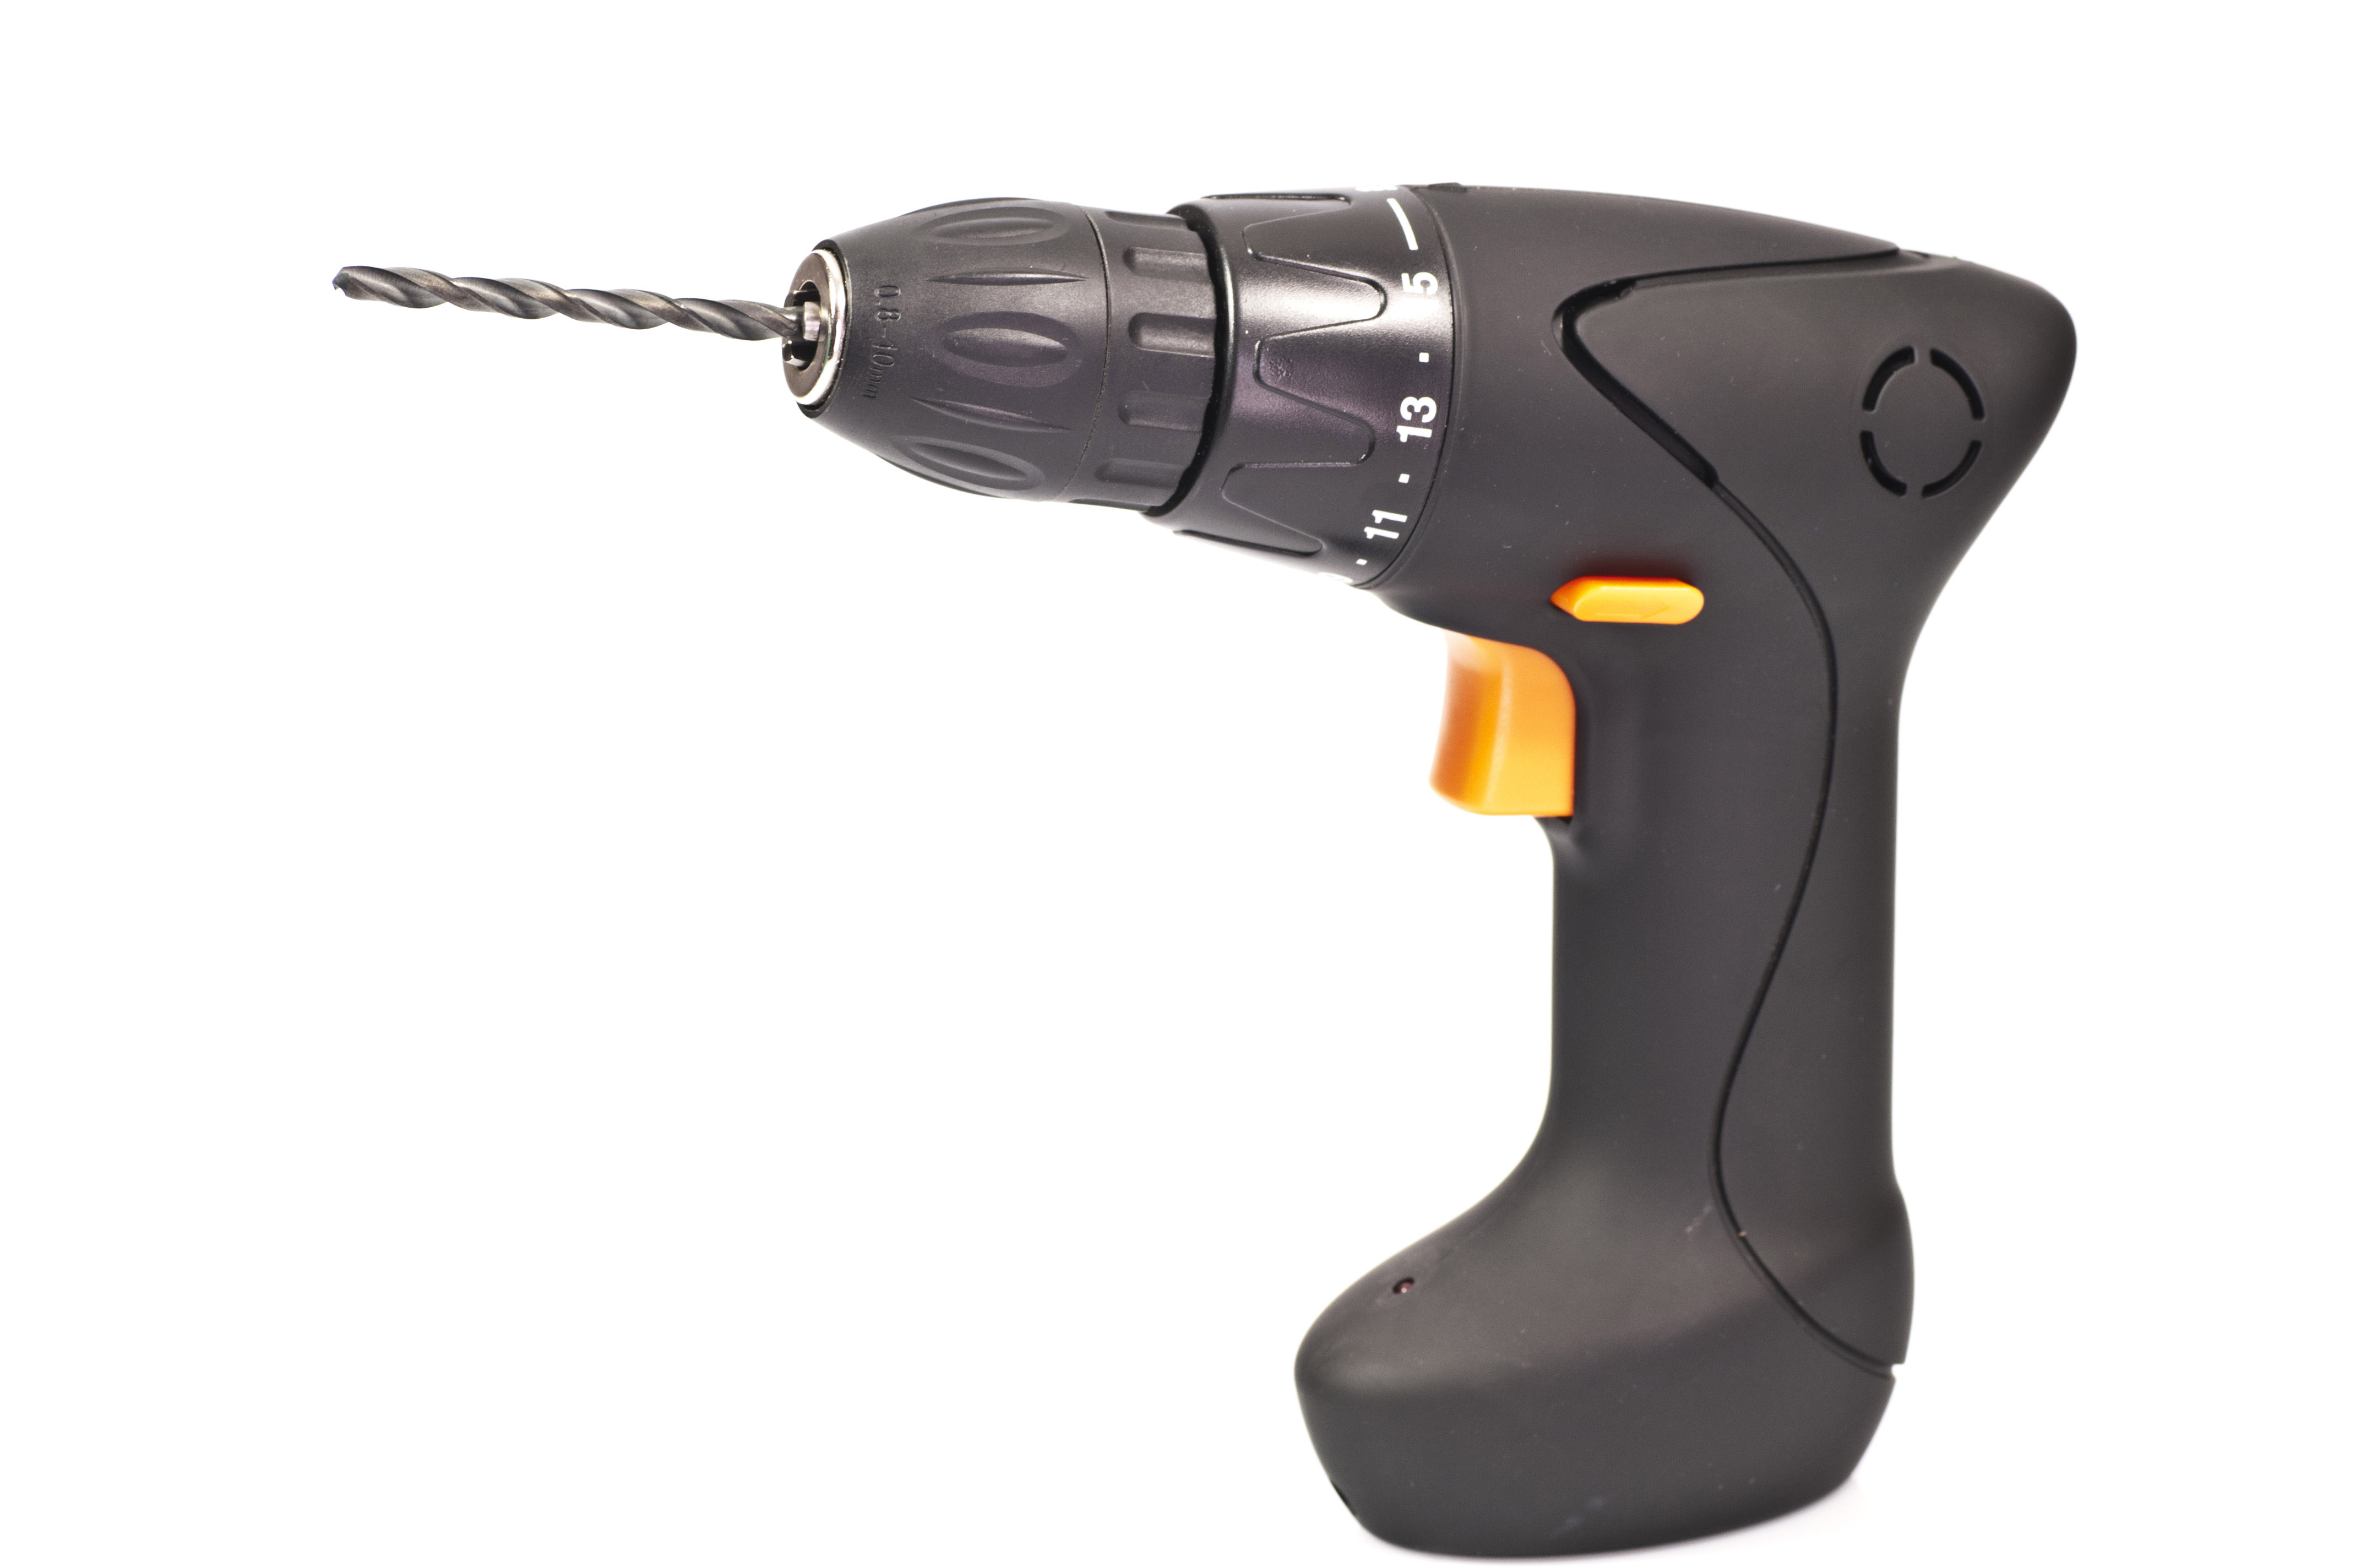 This handheld, battery-operated tool is one of many possible applications for RTP’s compounds.